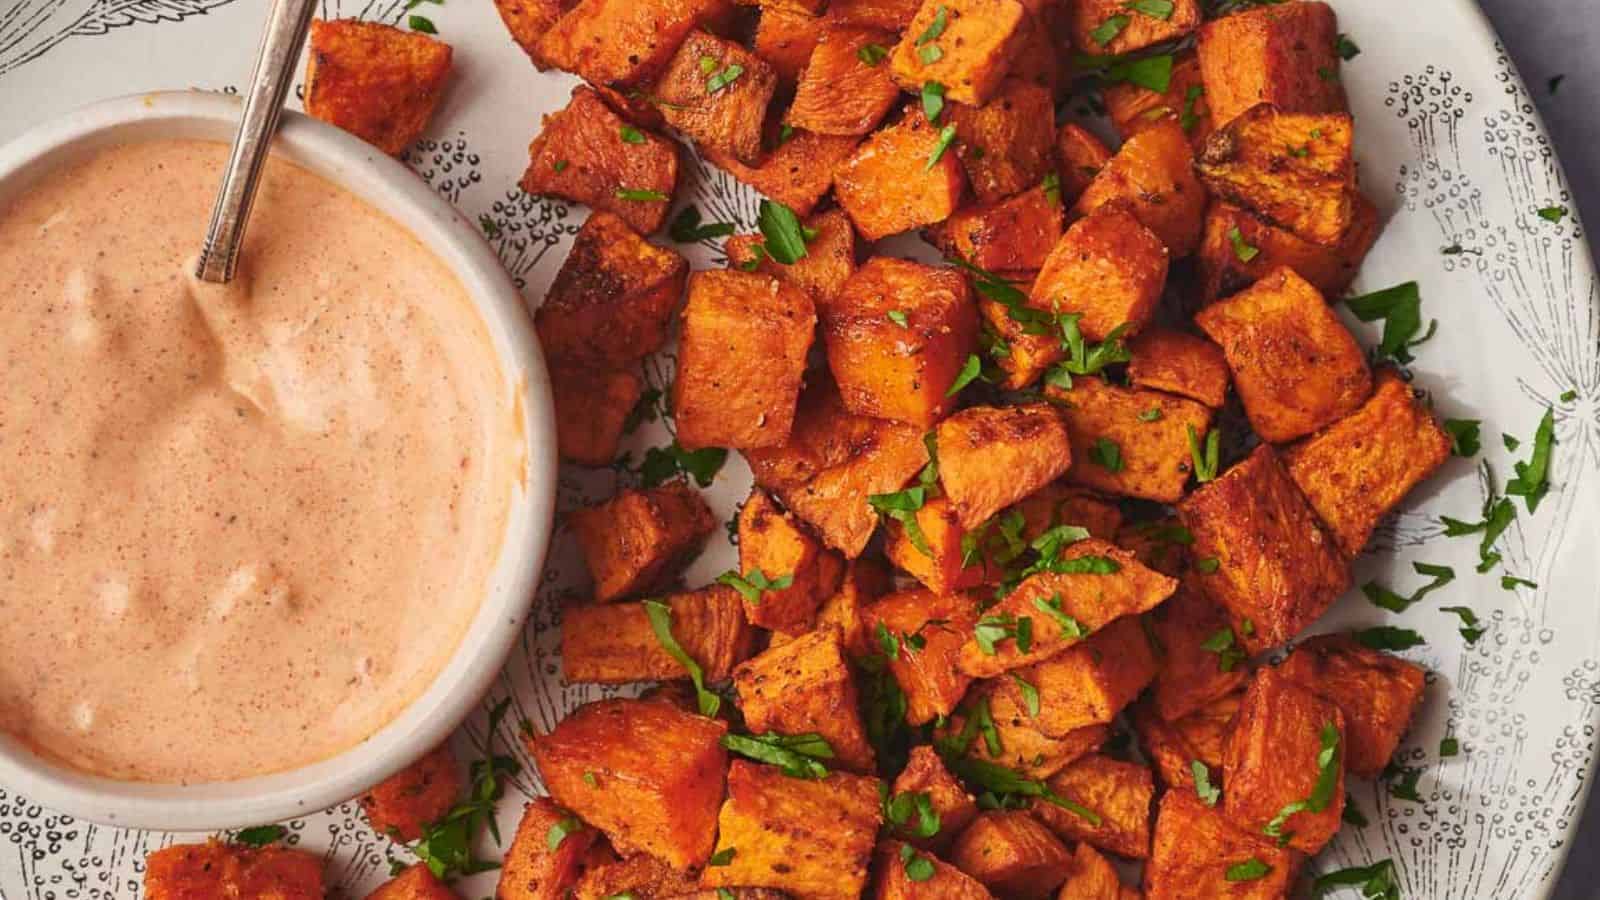 Sweet potato cubes on a plate with a dipping sauce.